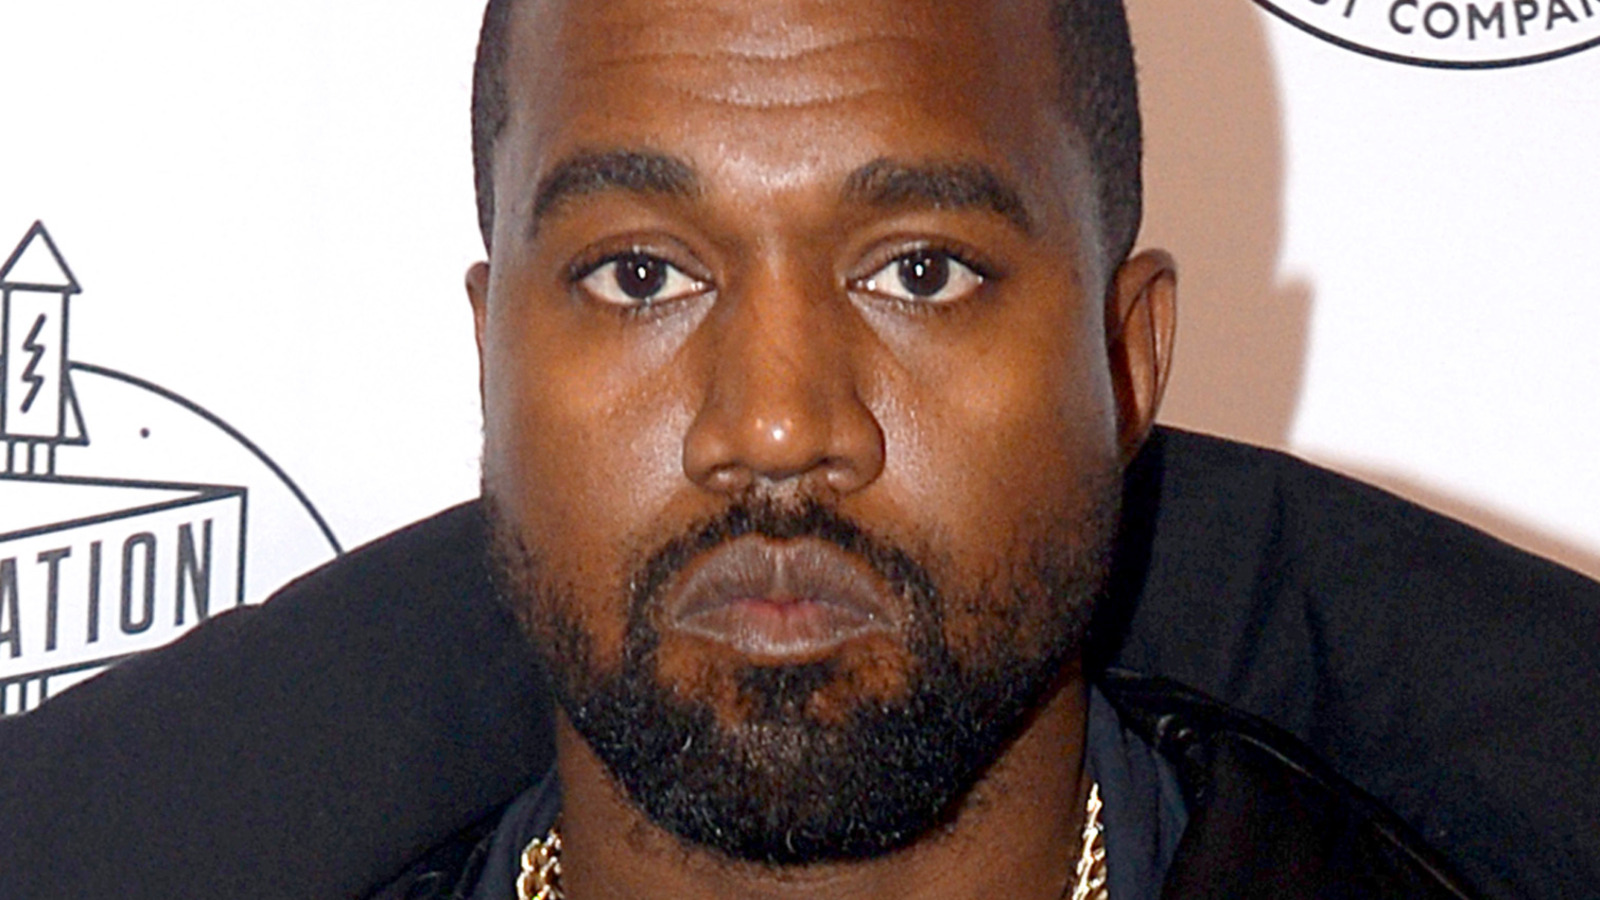 The Real Reason Walmart Just Called Out Kanye West